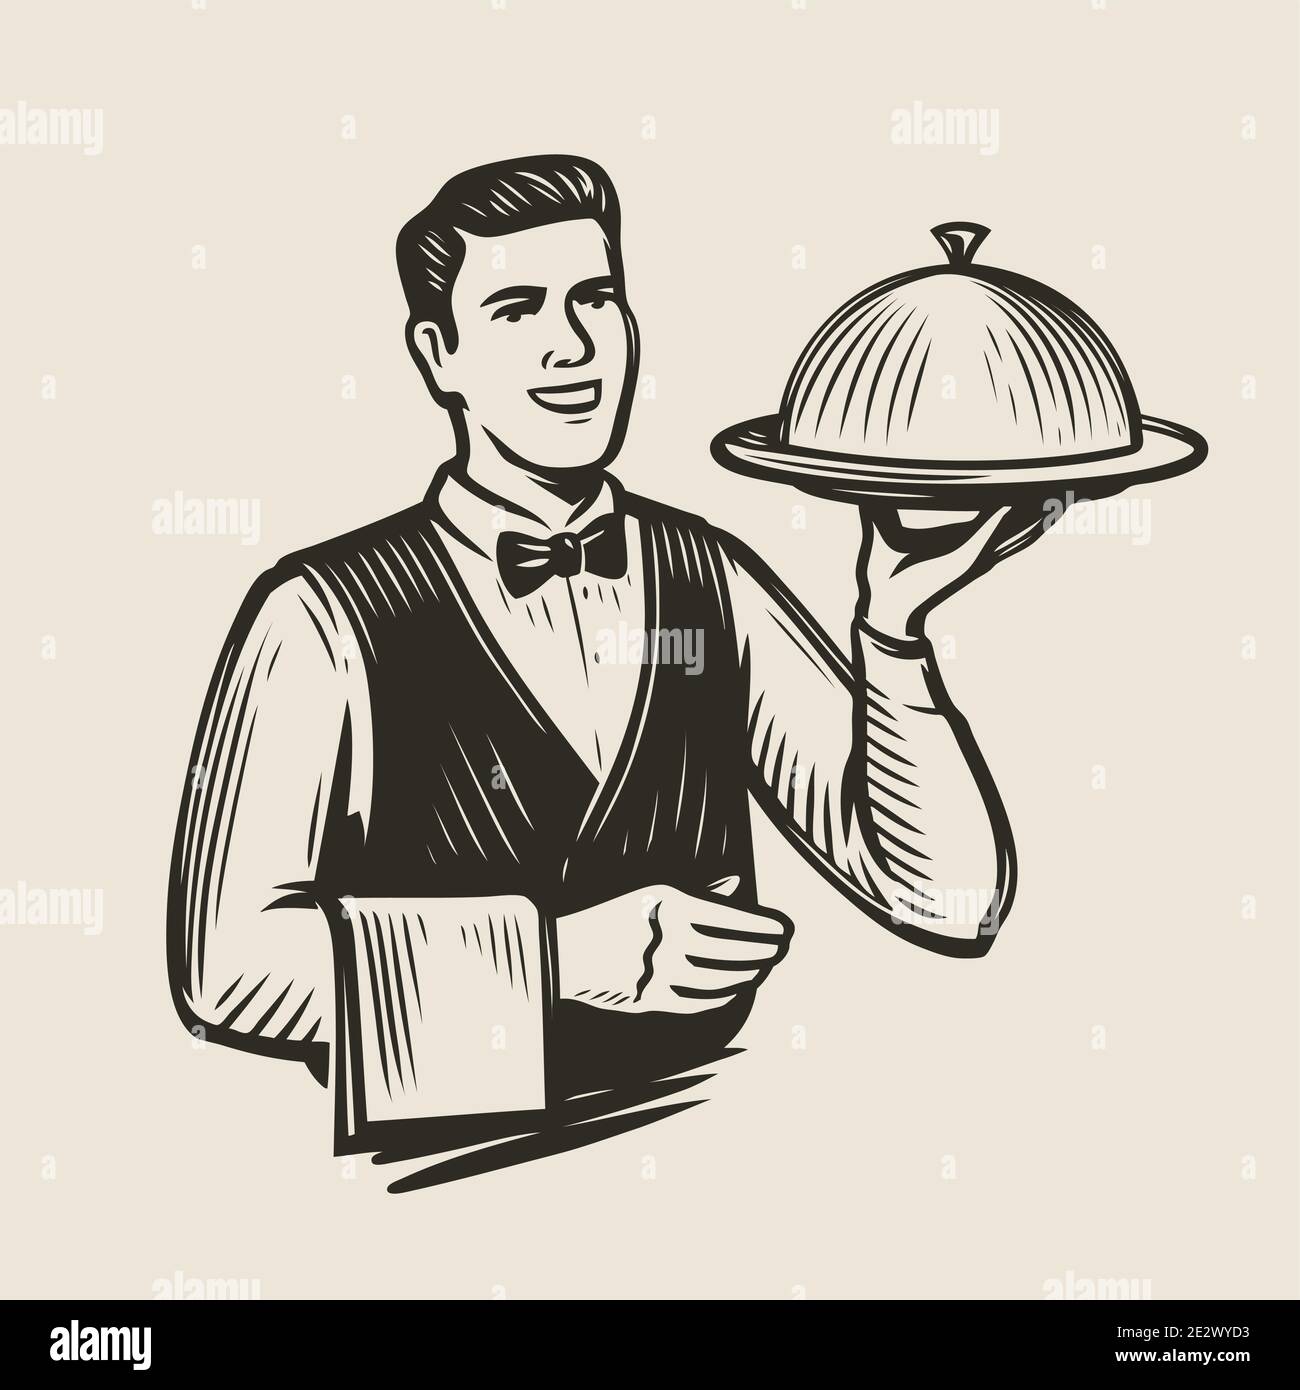 Waiter with a tray sketch. Restaurant, food service vector Stock Vector